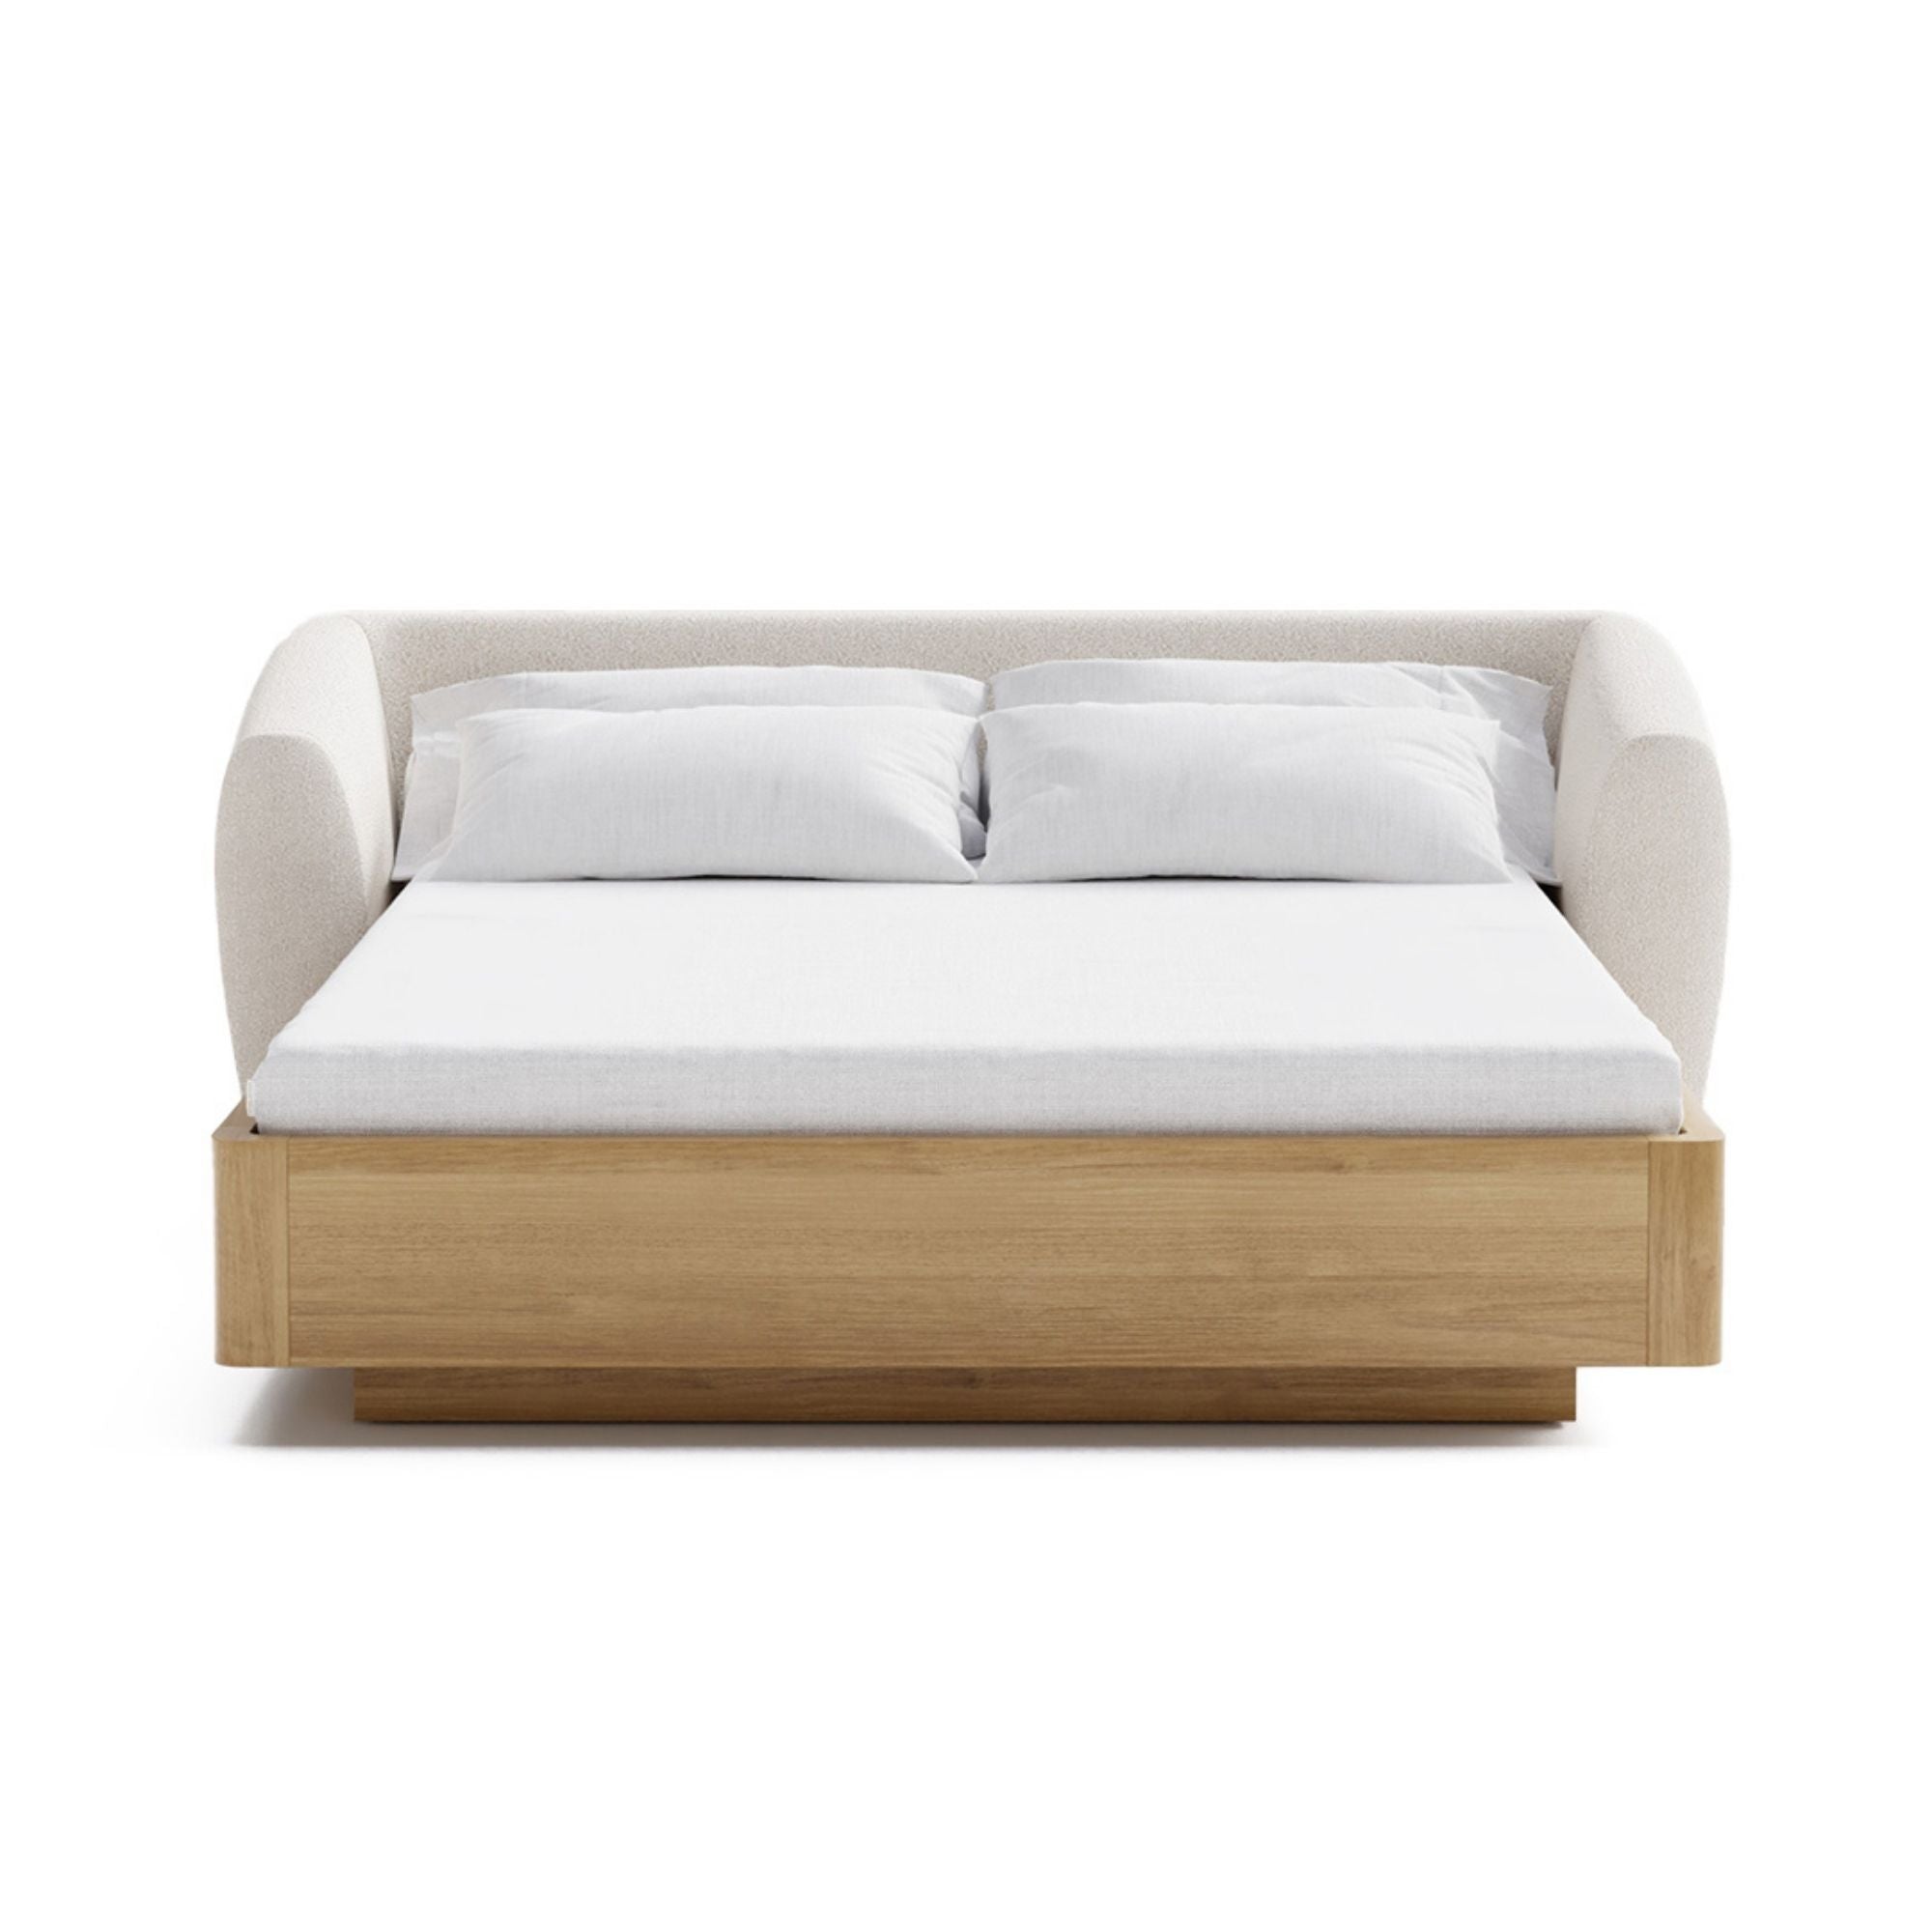 Nude Bed bed OSSKA